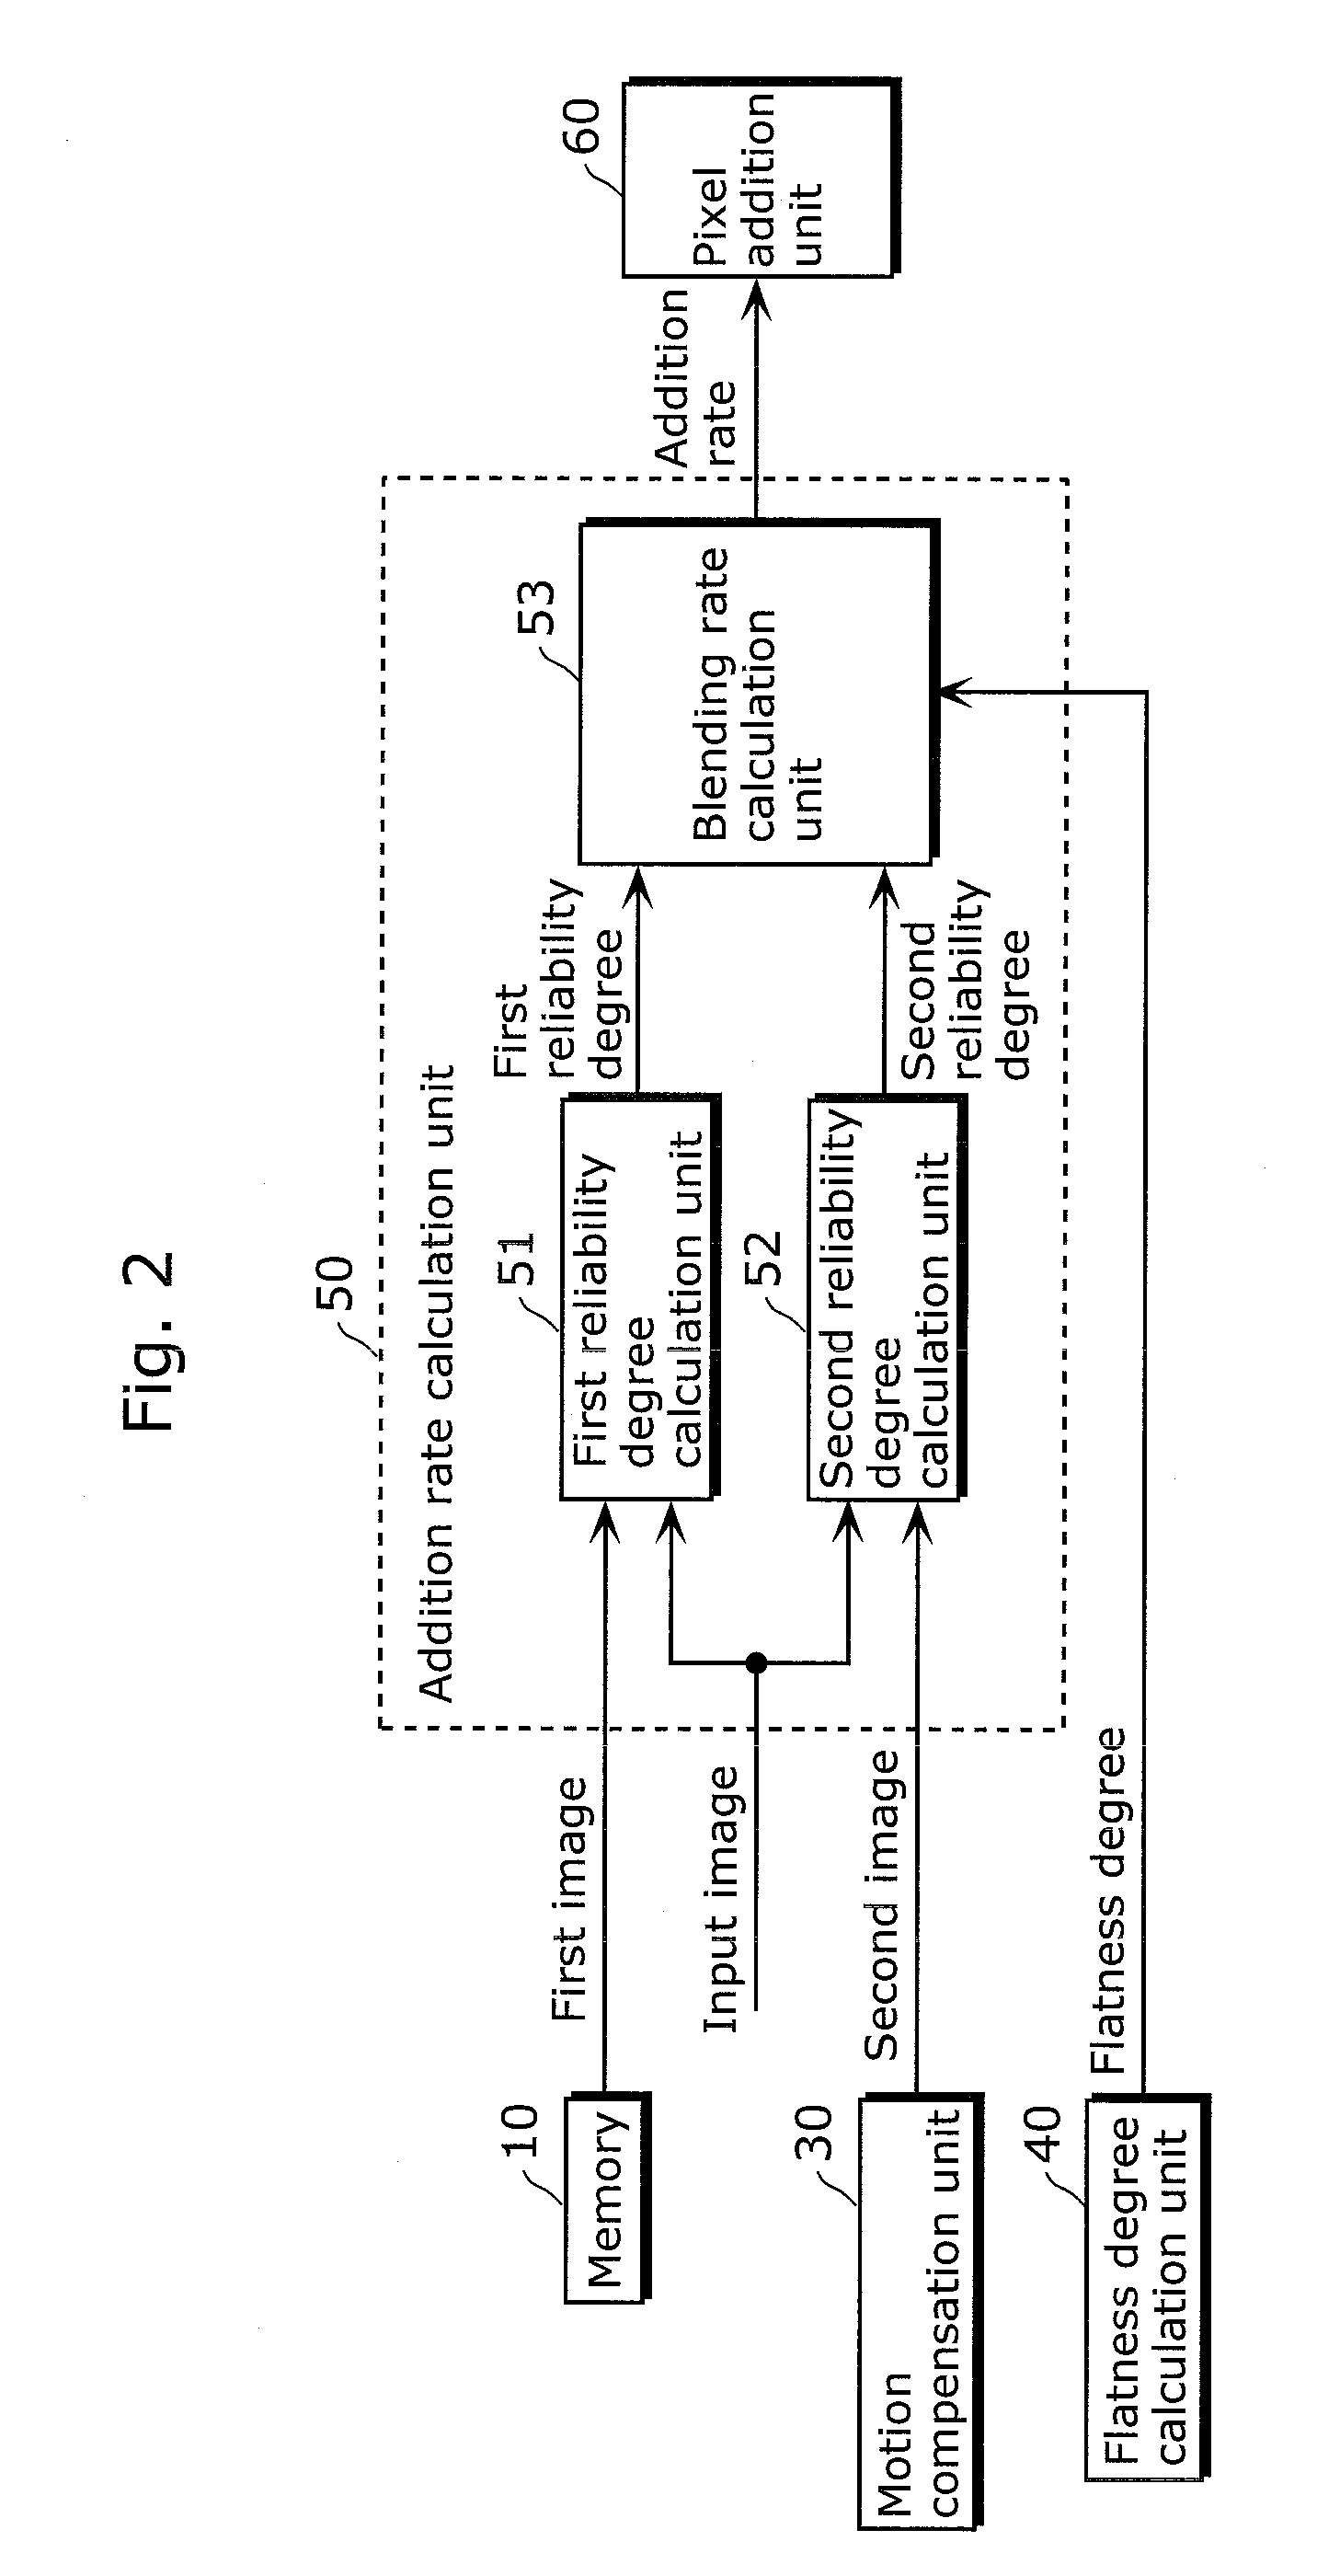 Image processing system and method for noise reduction